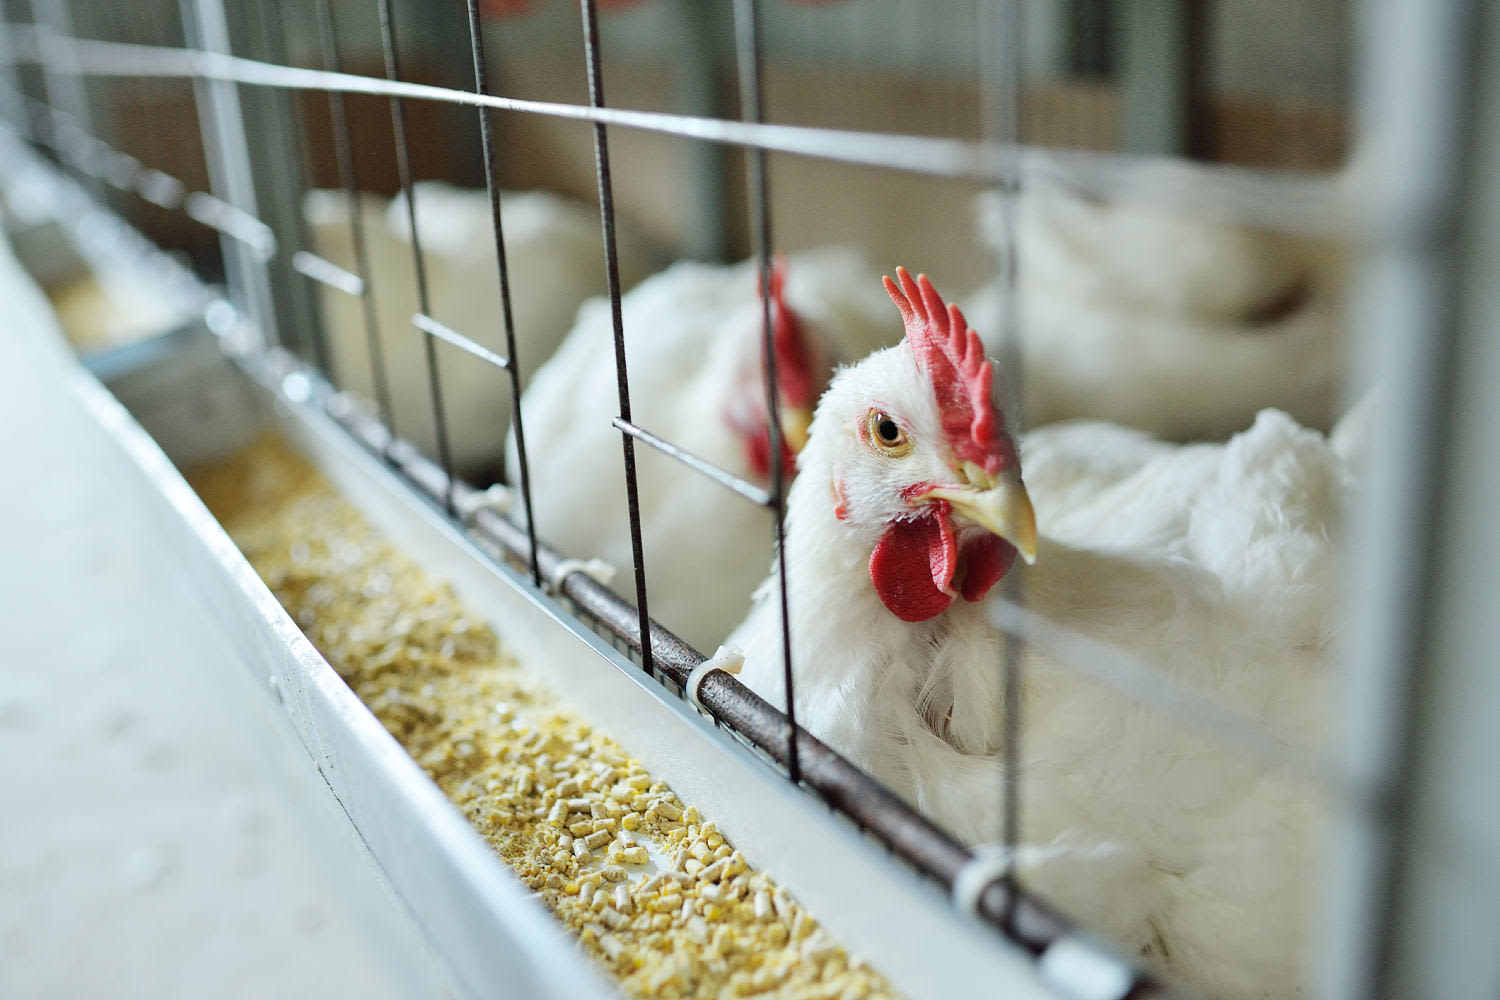 2nd person in US infected with bird flu: What to know about symptoms and transmission